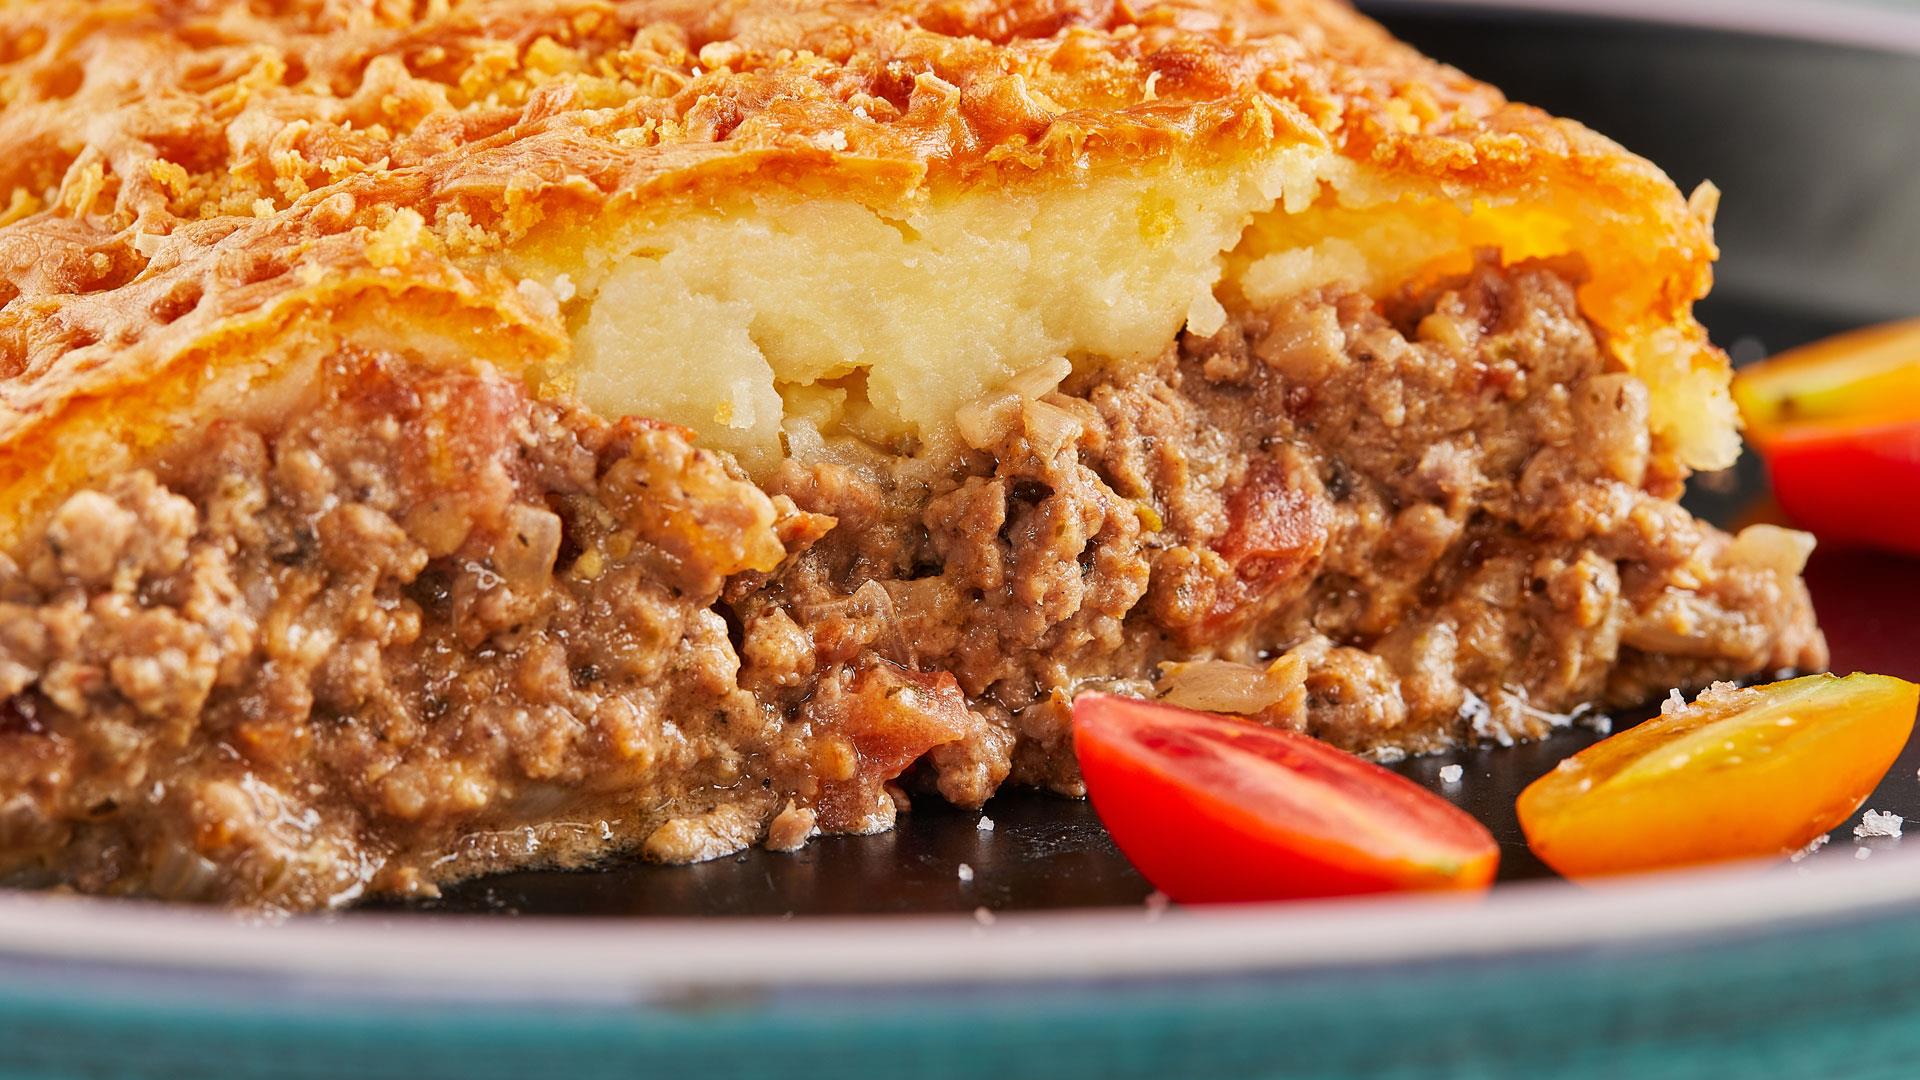 Minced beef and pie